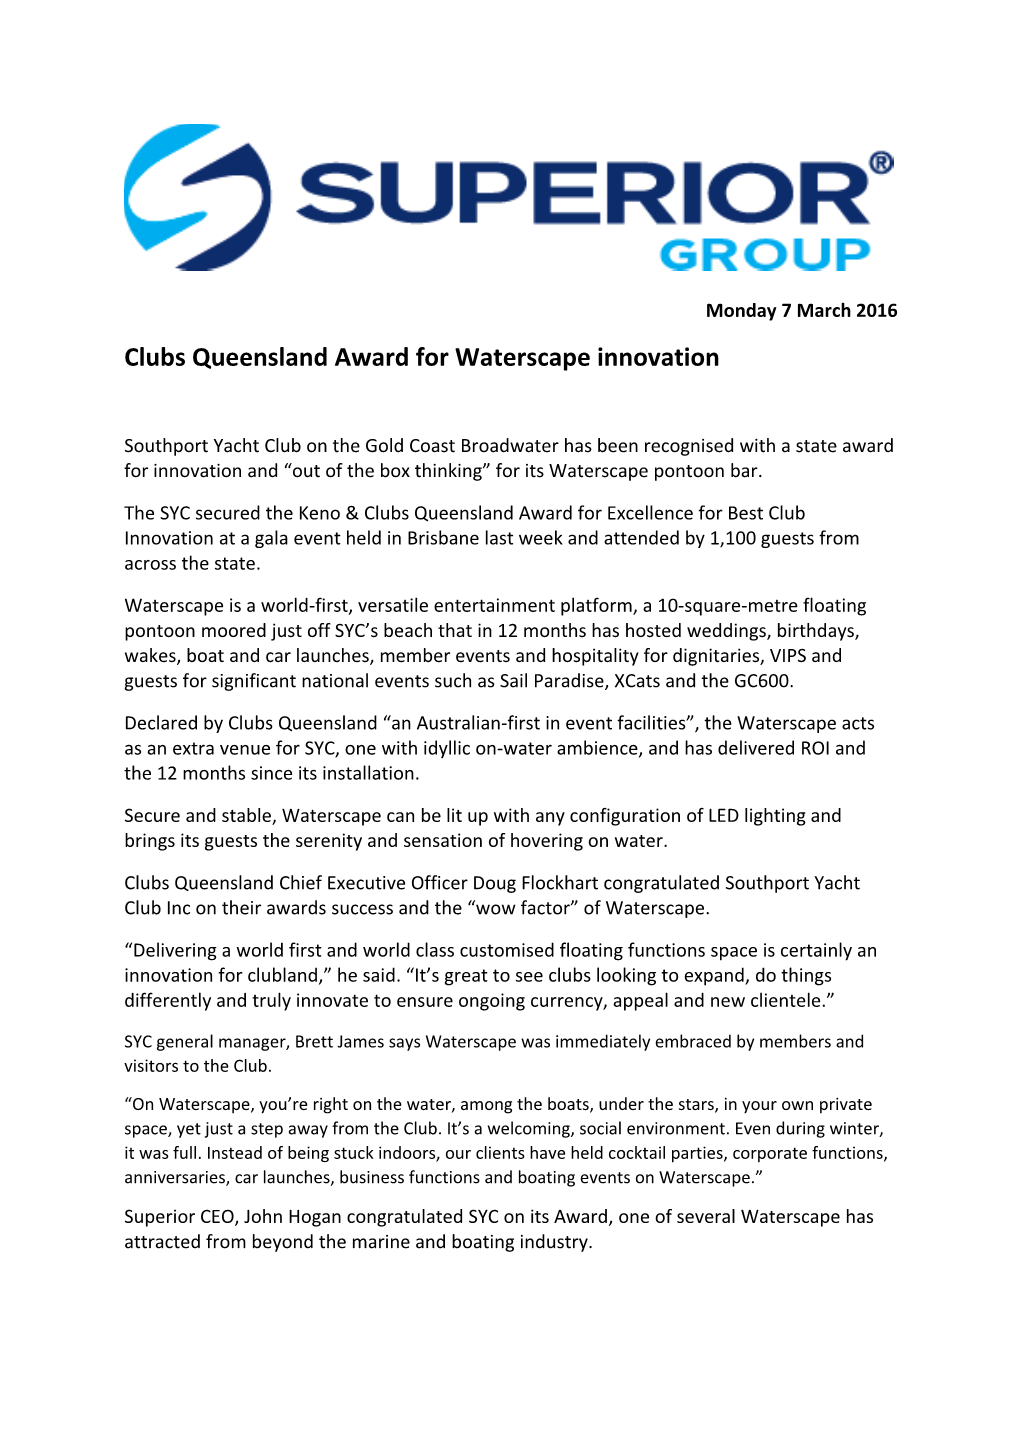 Clubs Queensland Award for Waterscape Innovation